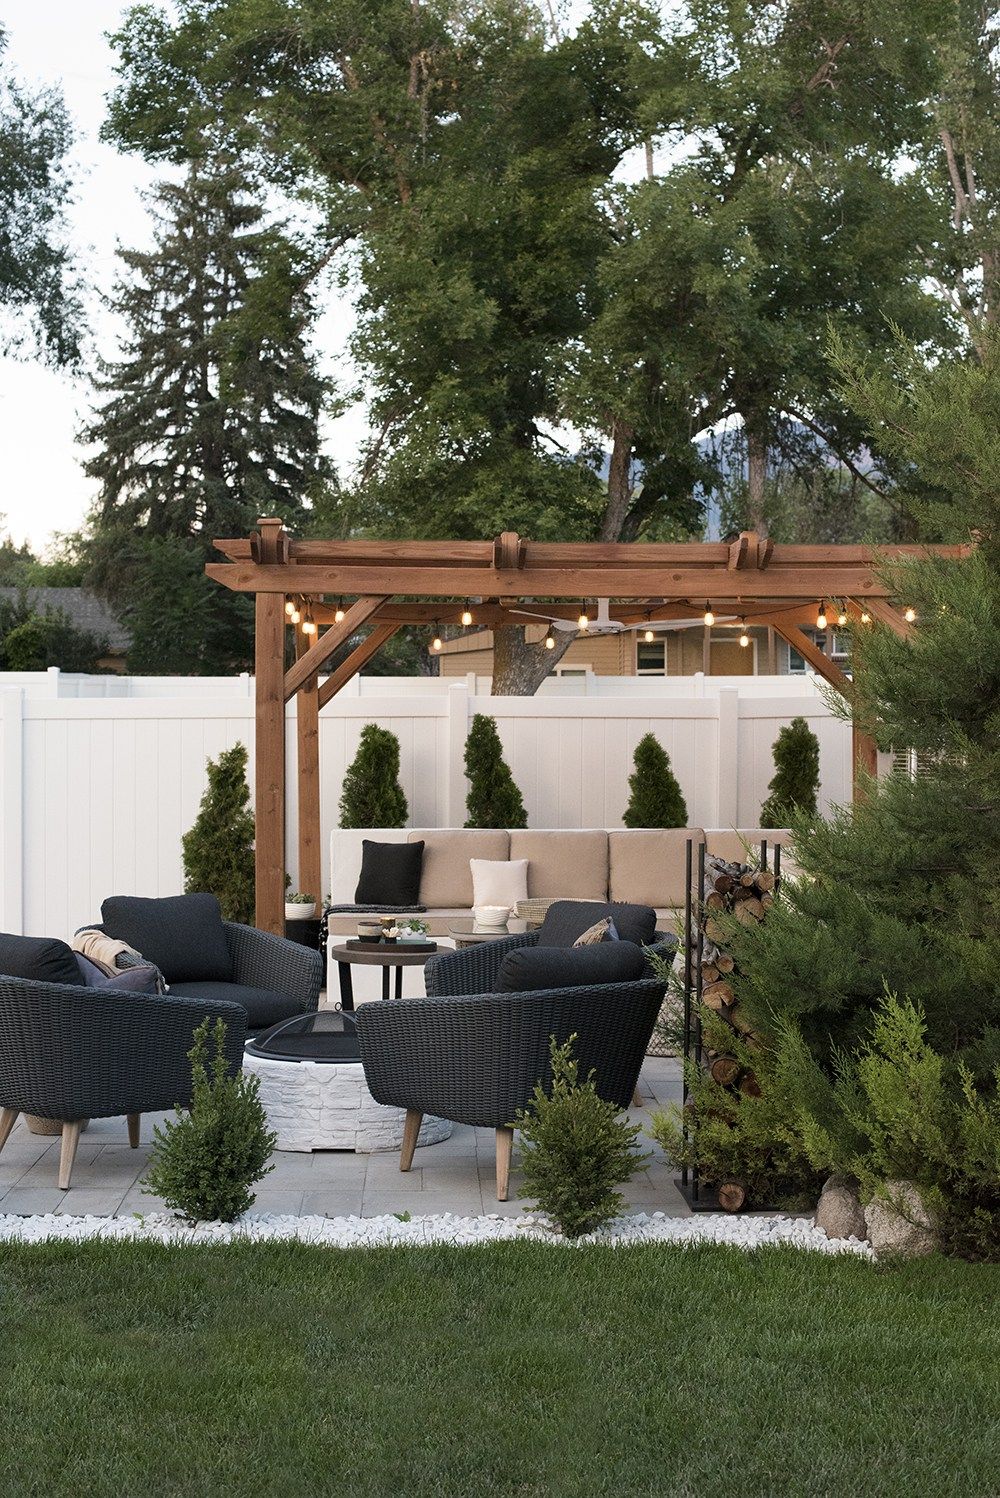 16 Best Pergola Ideas For The Backyard How To Use A Pergola,What Are Cloves In Luganda